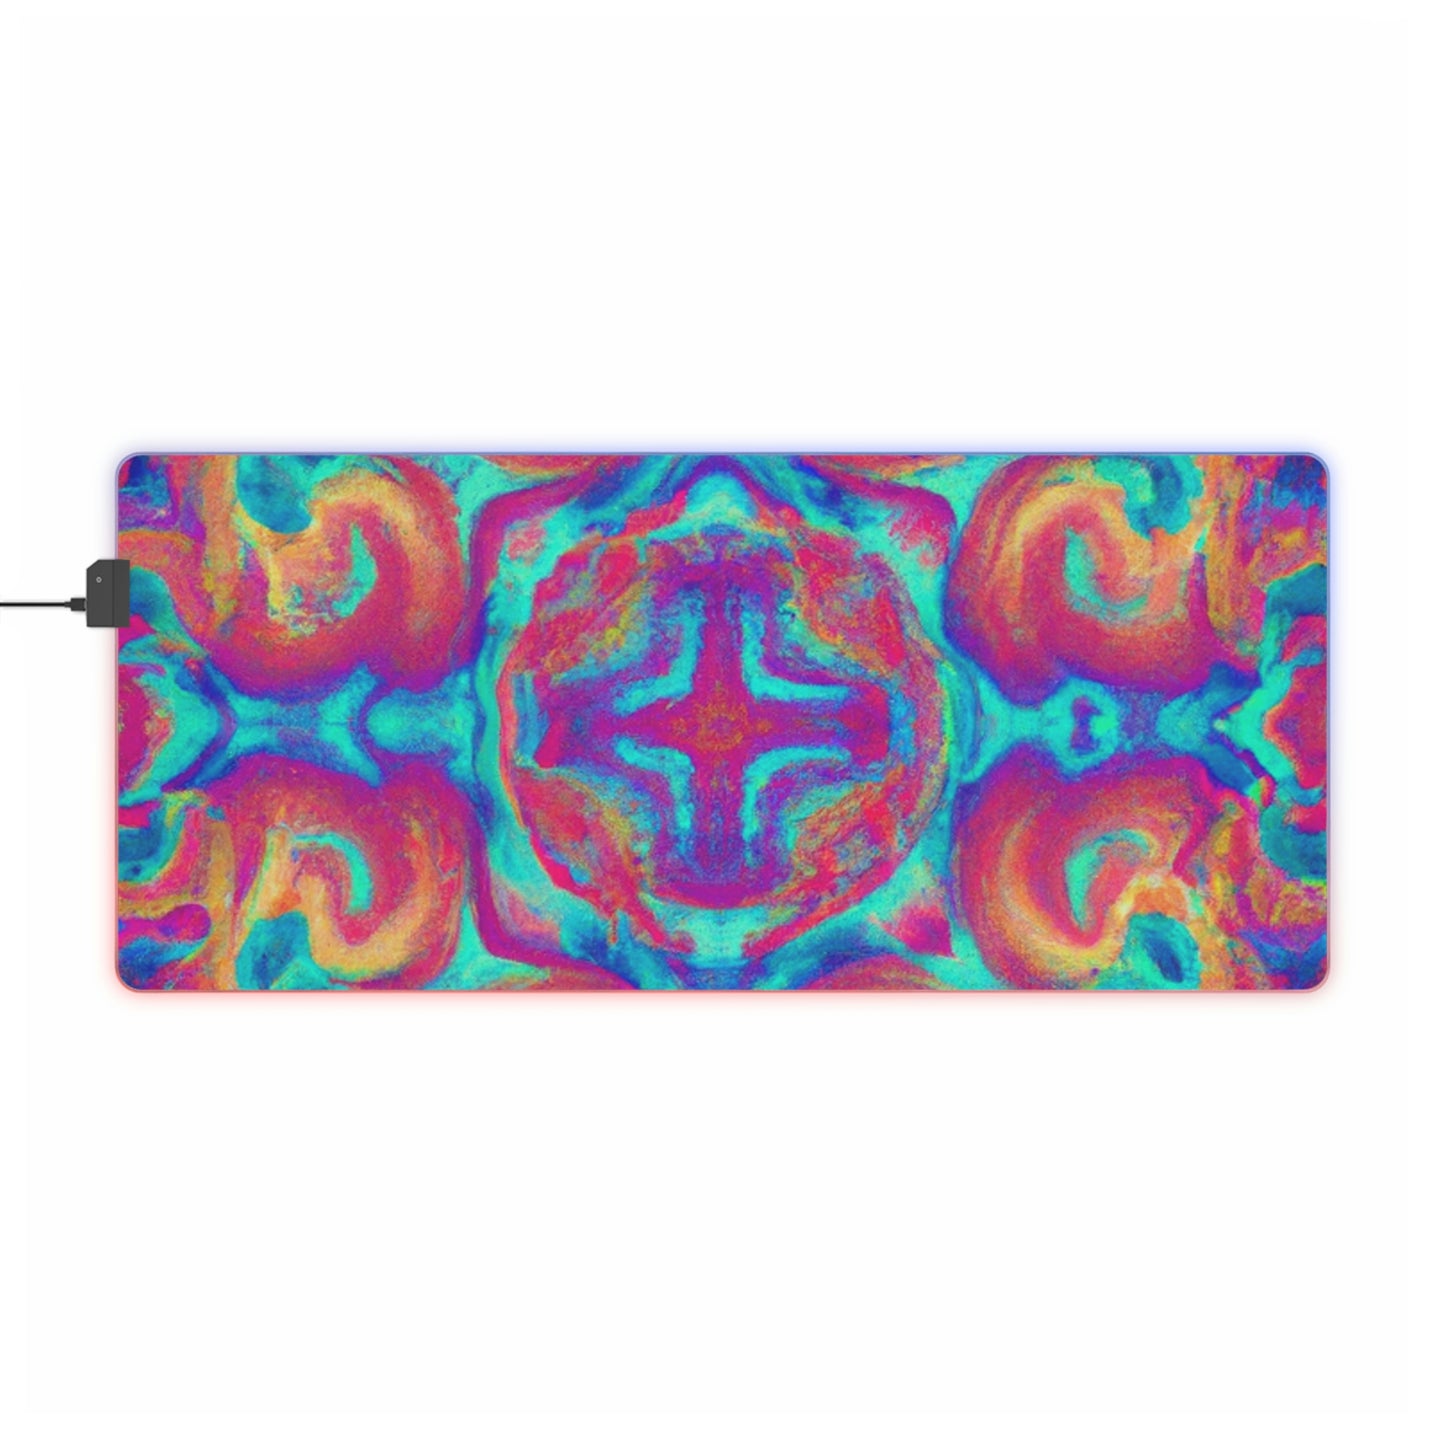 Mackenzie Maven - Psychedelic Trippy LED Light Up Gaming Mouse Pad